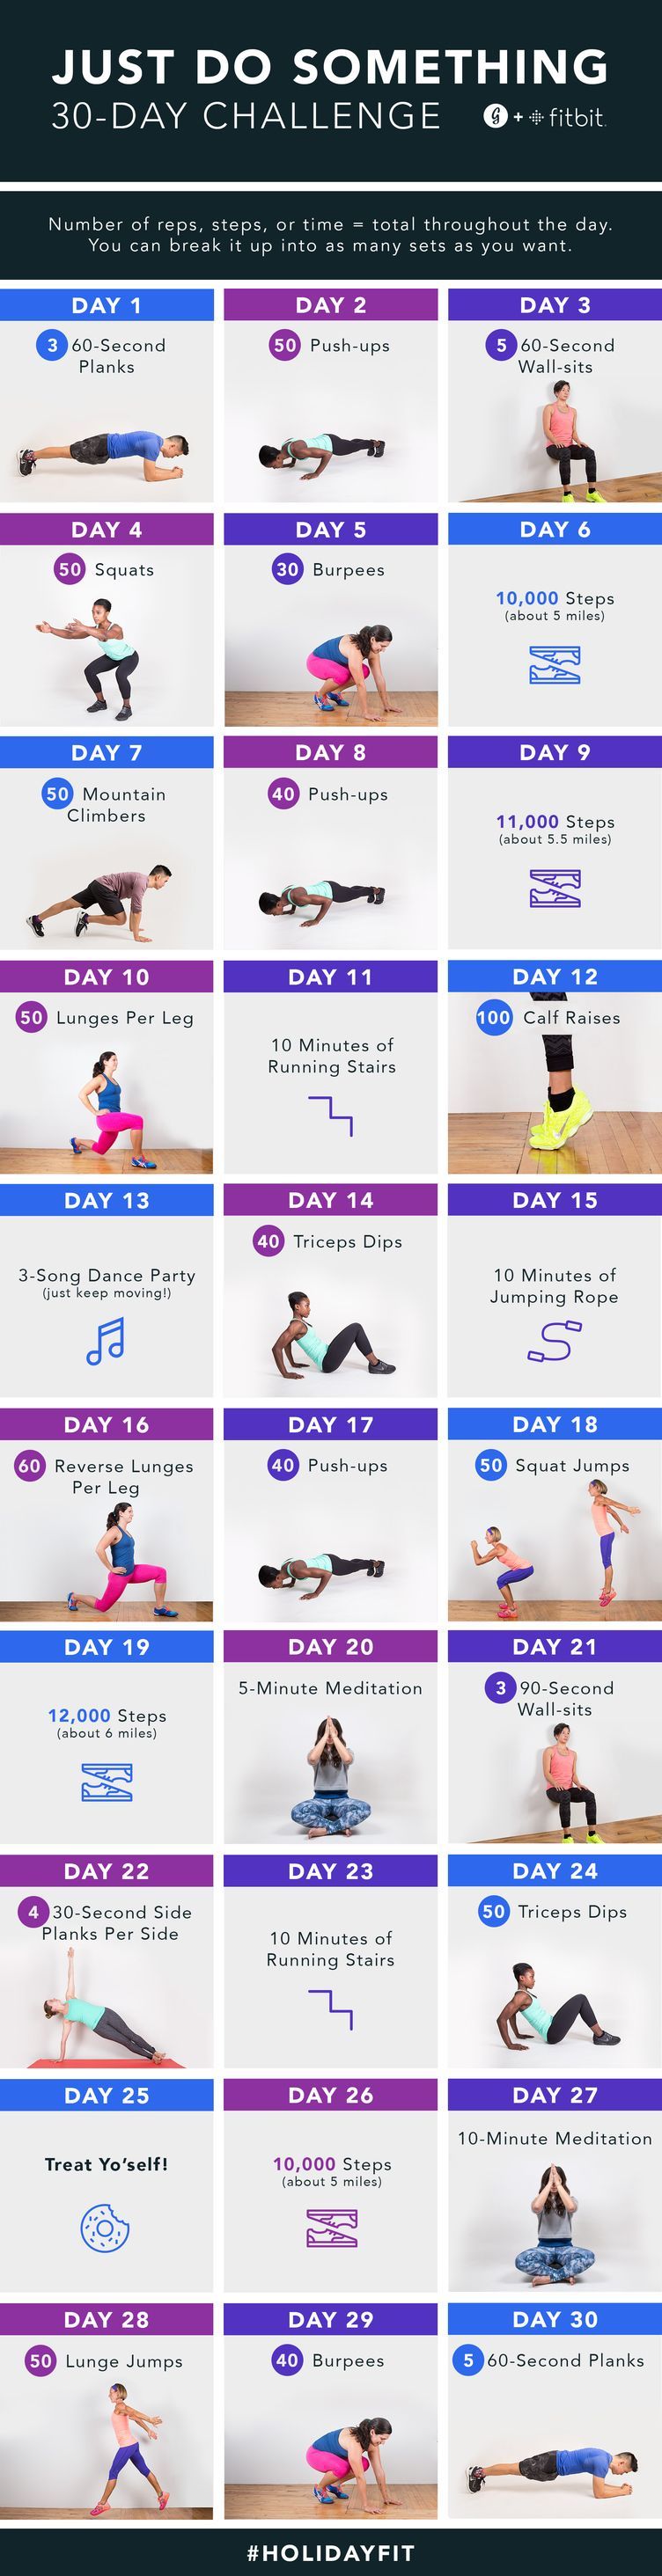 Greatist and Fitbit’s 30-Day, Just-Do Something Challenge